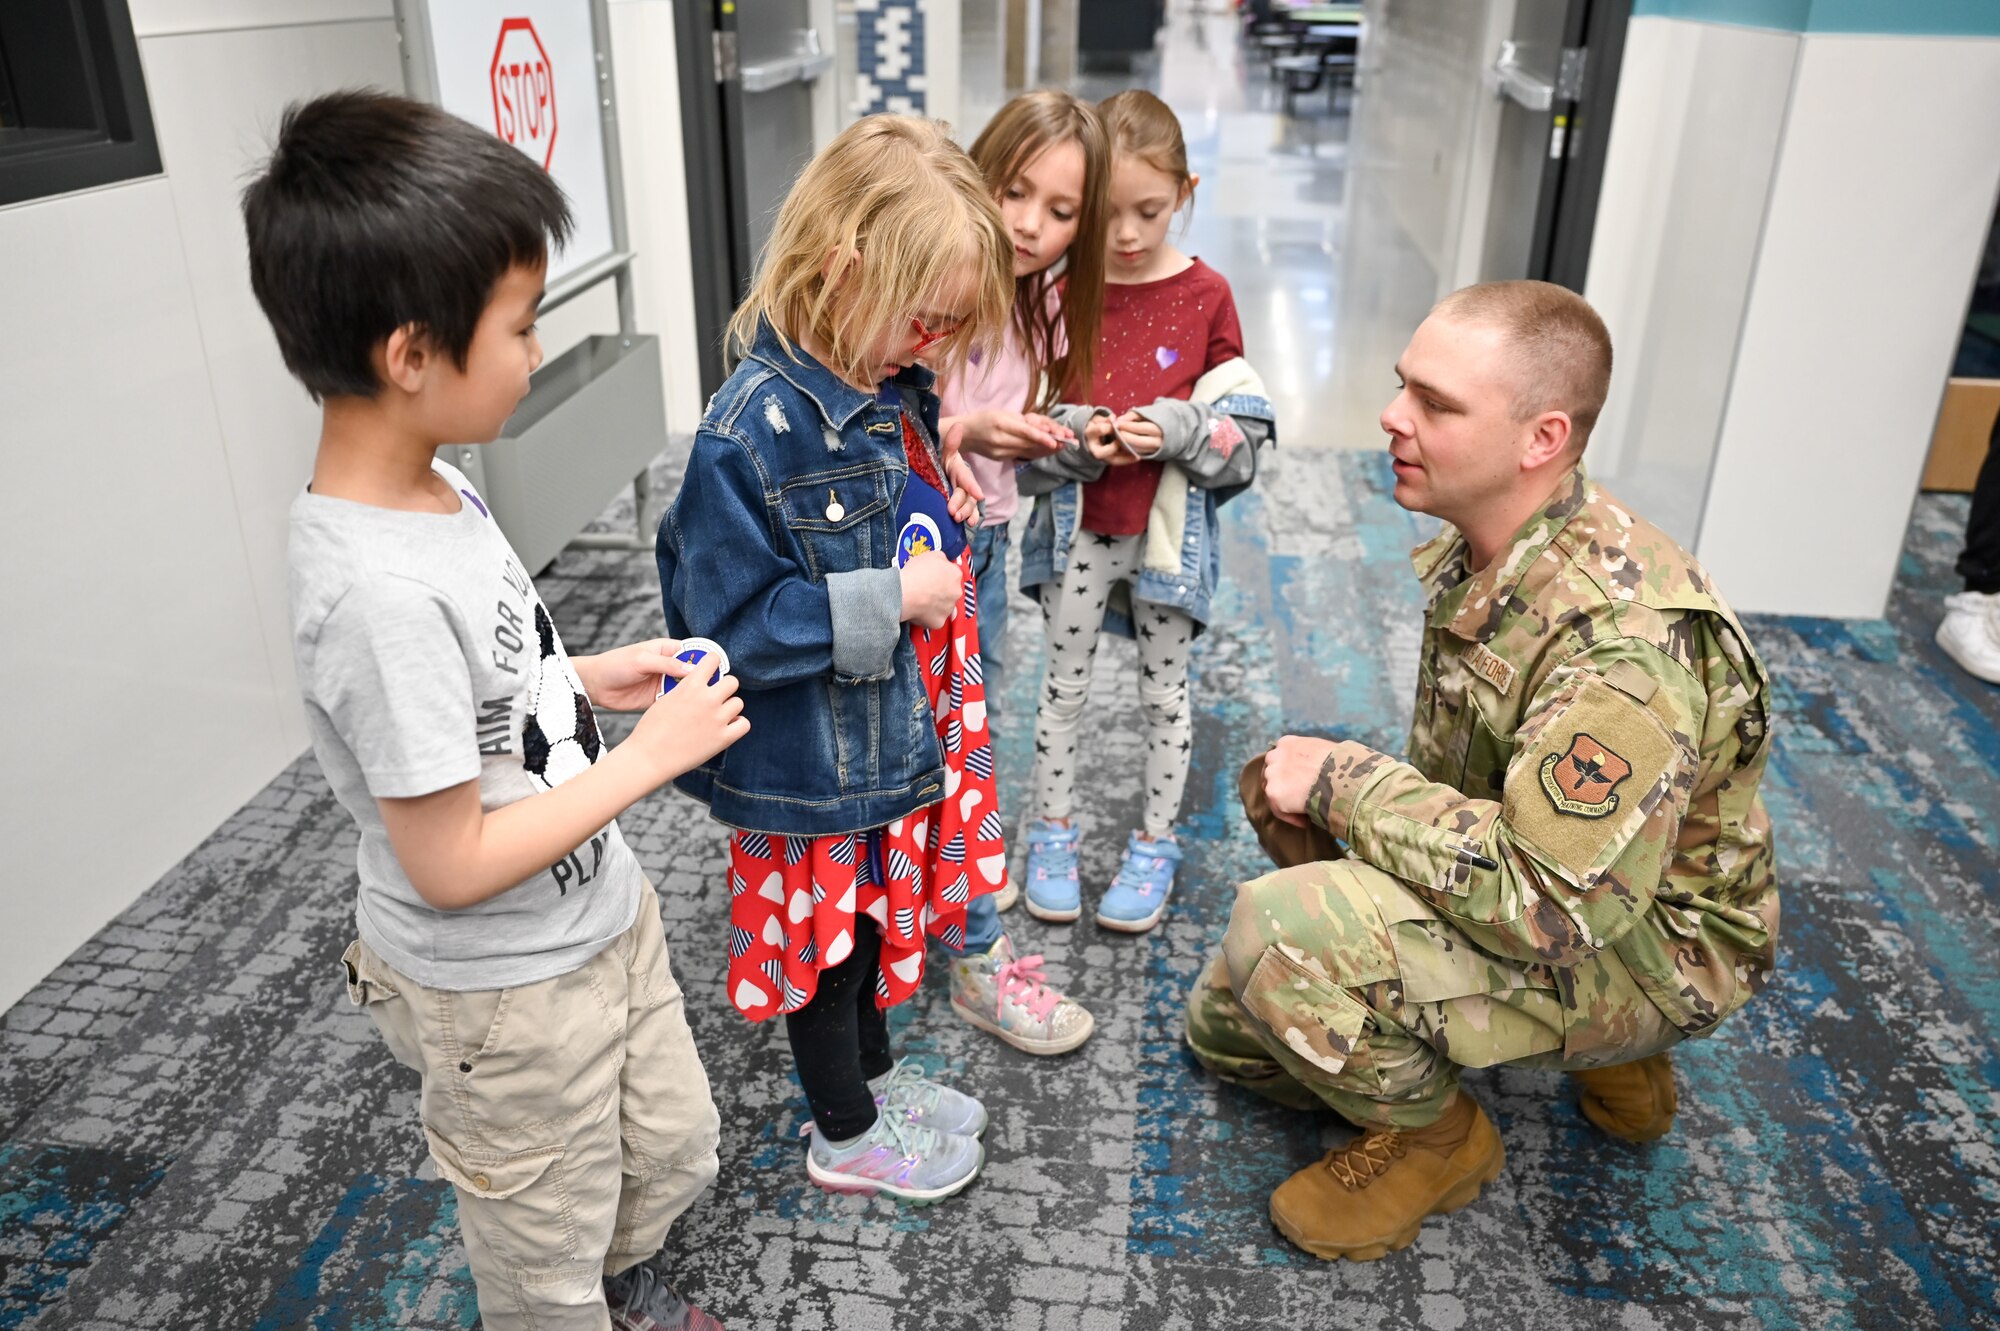 Technical Sgt. Nicholas Reider, 367th Training Support Squadron, chats with South Clearfield Elementary students April 18, 2023, in Clearfield, Utah. The Airmen visited the school to engage with the community during the Month of the Military Child. (U.S. Air Force photo by Cynthia Griggs)